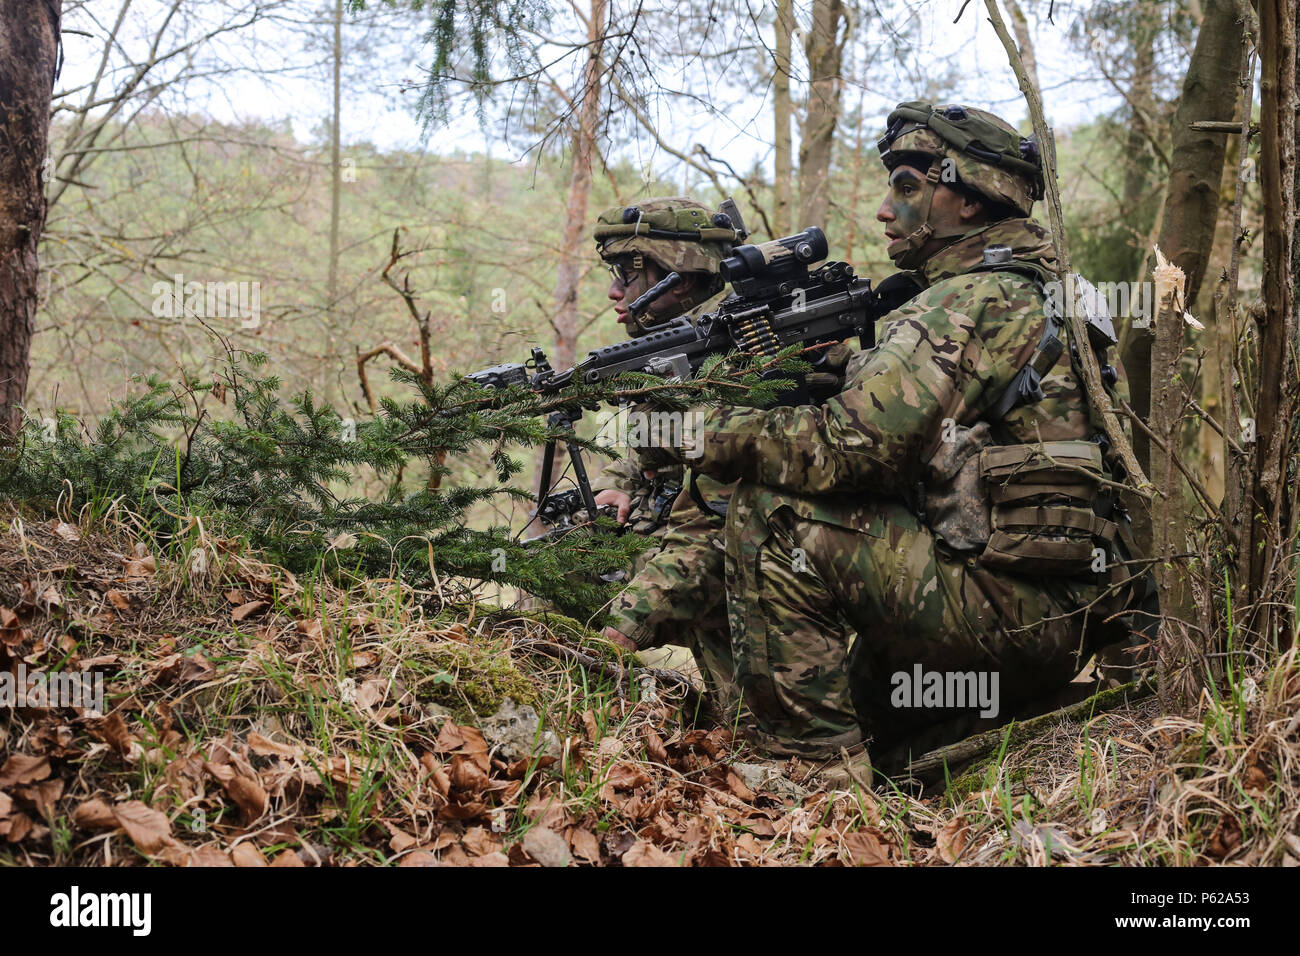 U.S. Soldiers of Able Company, 2nd Battalion, 503rd Infantry Regiment, 173rd Airborne Brigade scan their sector of fire during a counter reconnaissance offensive operational scenario during exercise Saber Junction 16 at the U.S. Army’s Joint Multinational Readiness Center (JMRC) in Hohenfels, Germany, April 14, 2016. Saber Junction 16 is the U.S. Army Europe’s 173rd Airborne Brigade’s combat training center certification exercise, taking place at the JMRC in Hohenfels, Germany, Mar. 31-Apr. 24, 2016.  The exercise is designed to evaluate the readiness of the Army’s Europe-based combat brigades Stock Photo